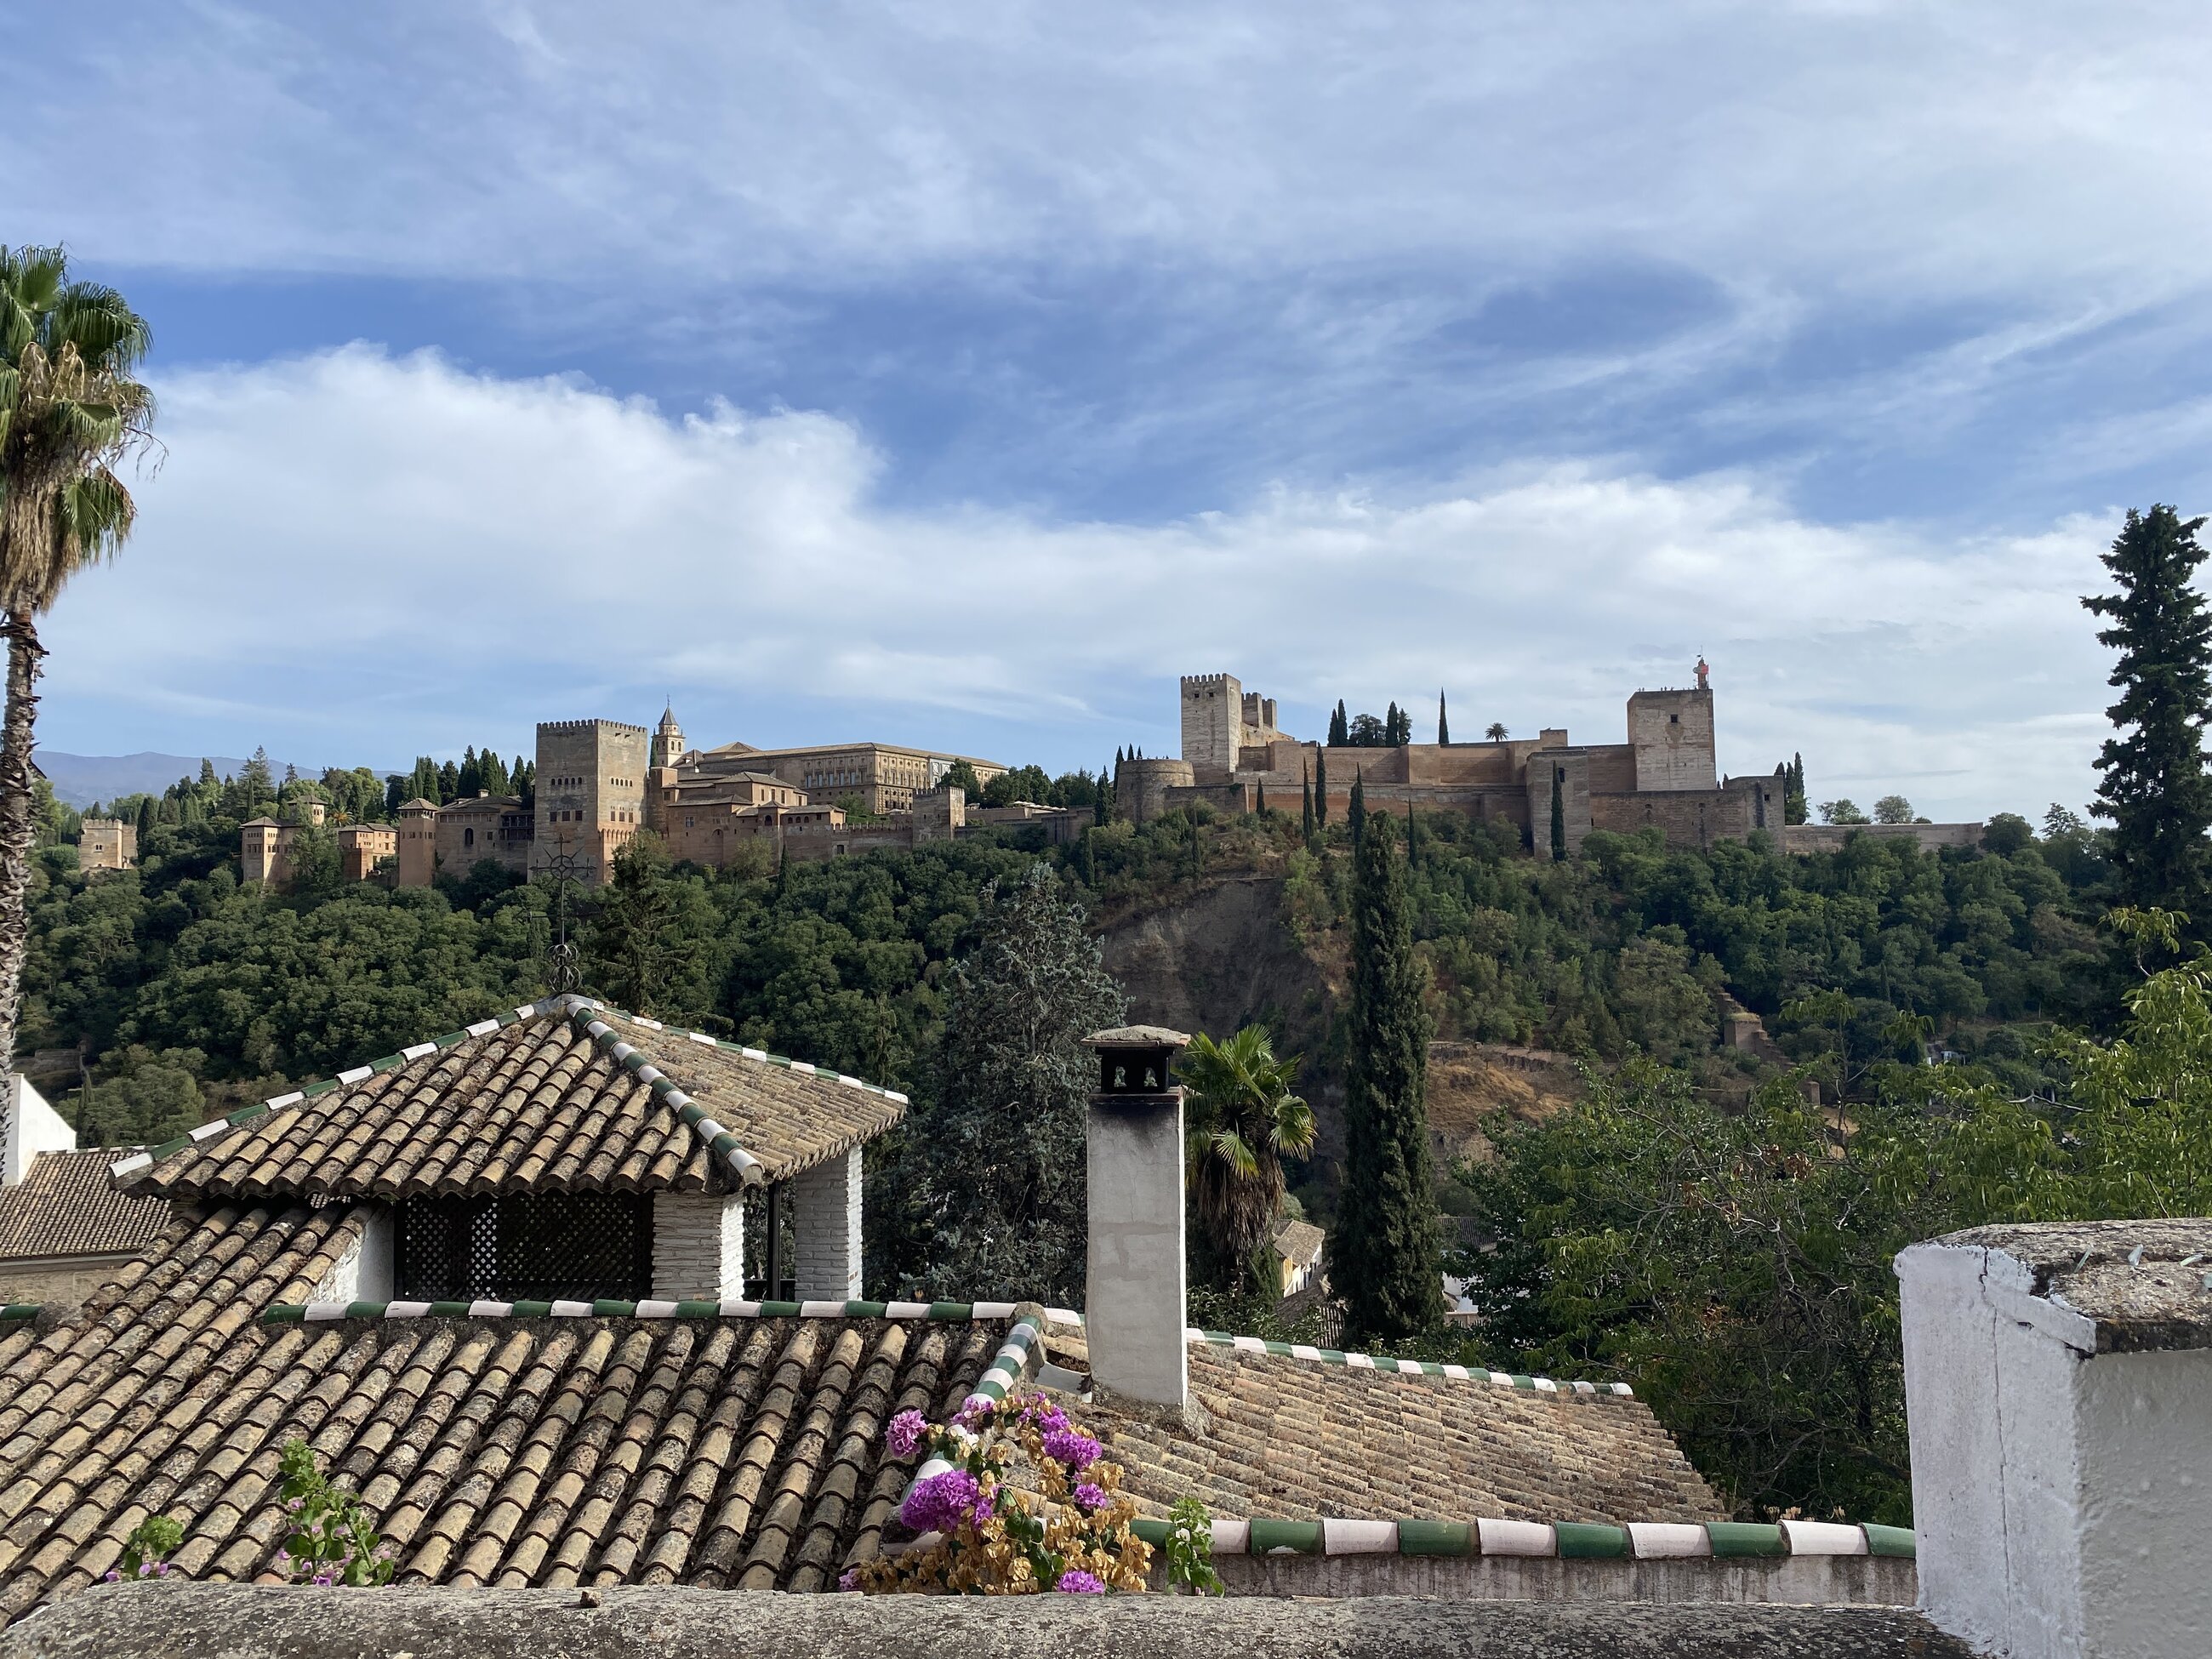 View of Alhambra Palace from the Albaícin neighborhood